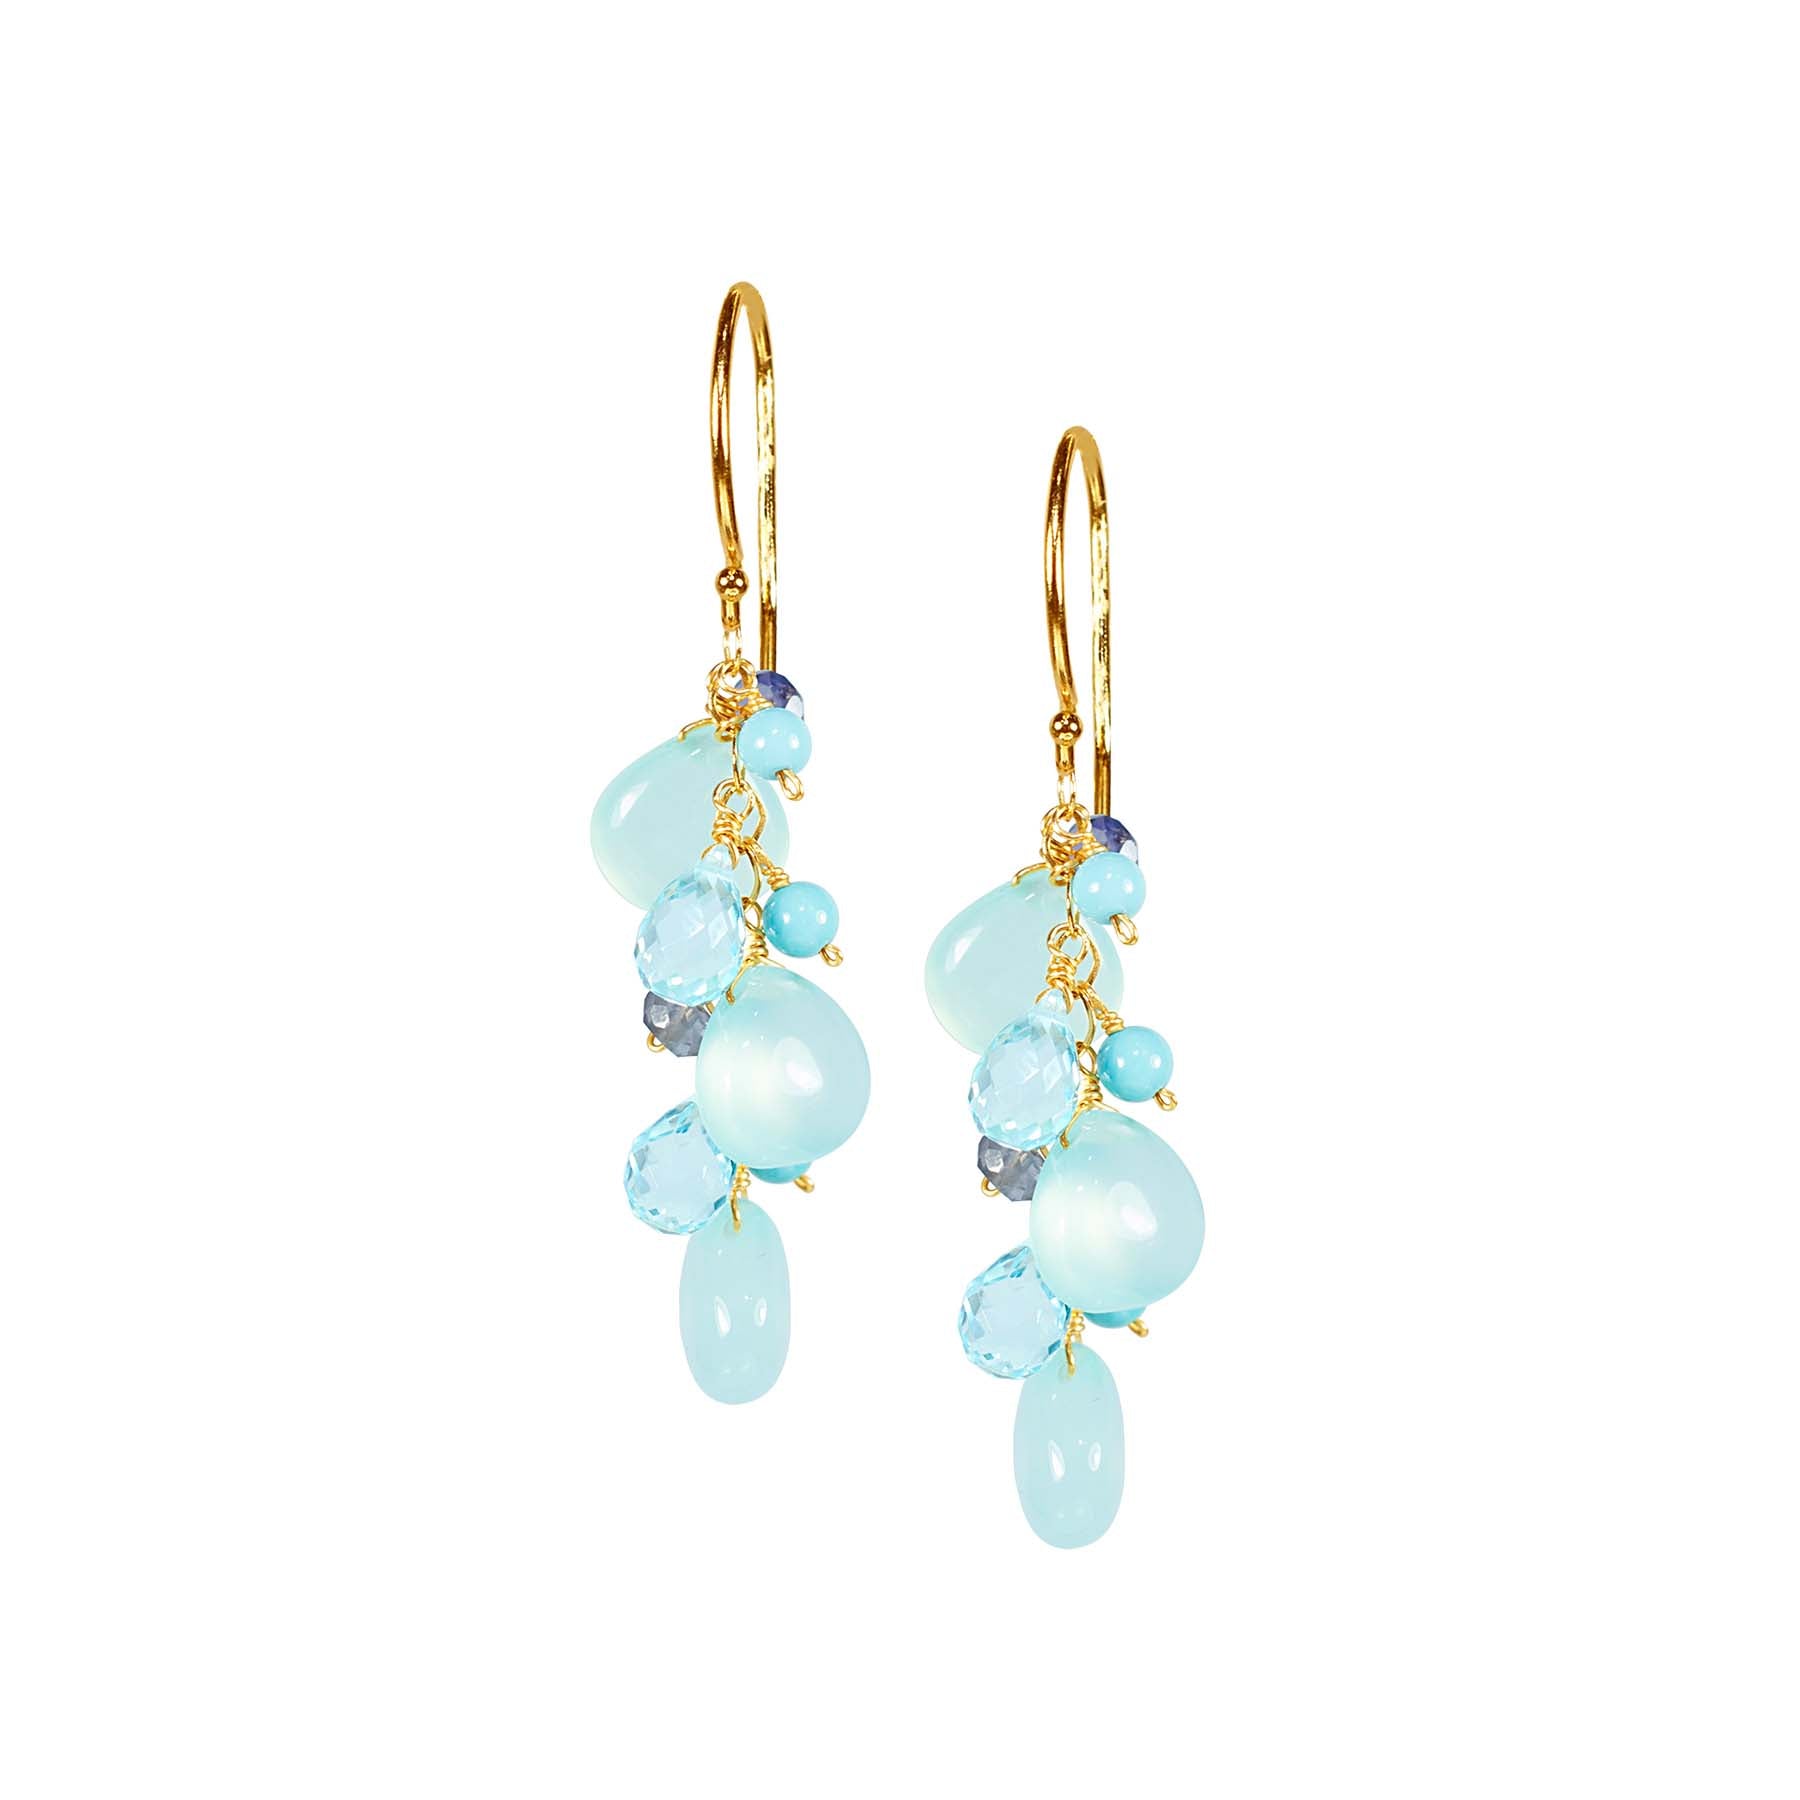 14k Blue Chalcedony, Blue Topaz, Turquoise, and Iolite Hook Earrings